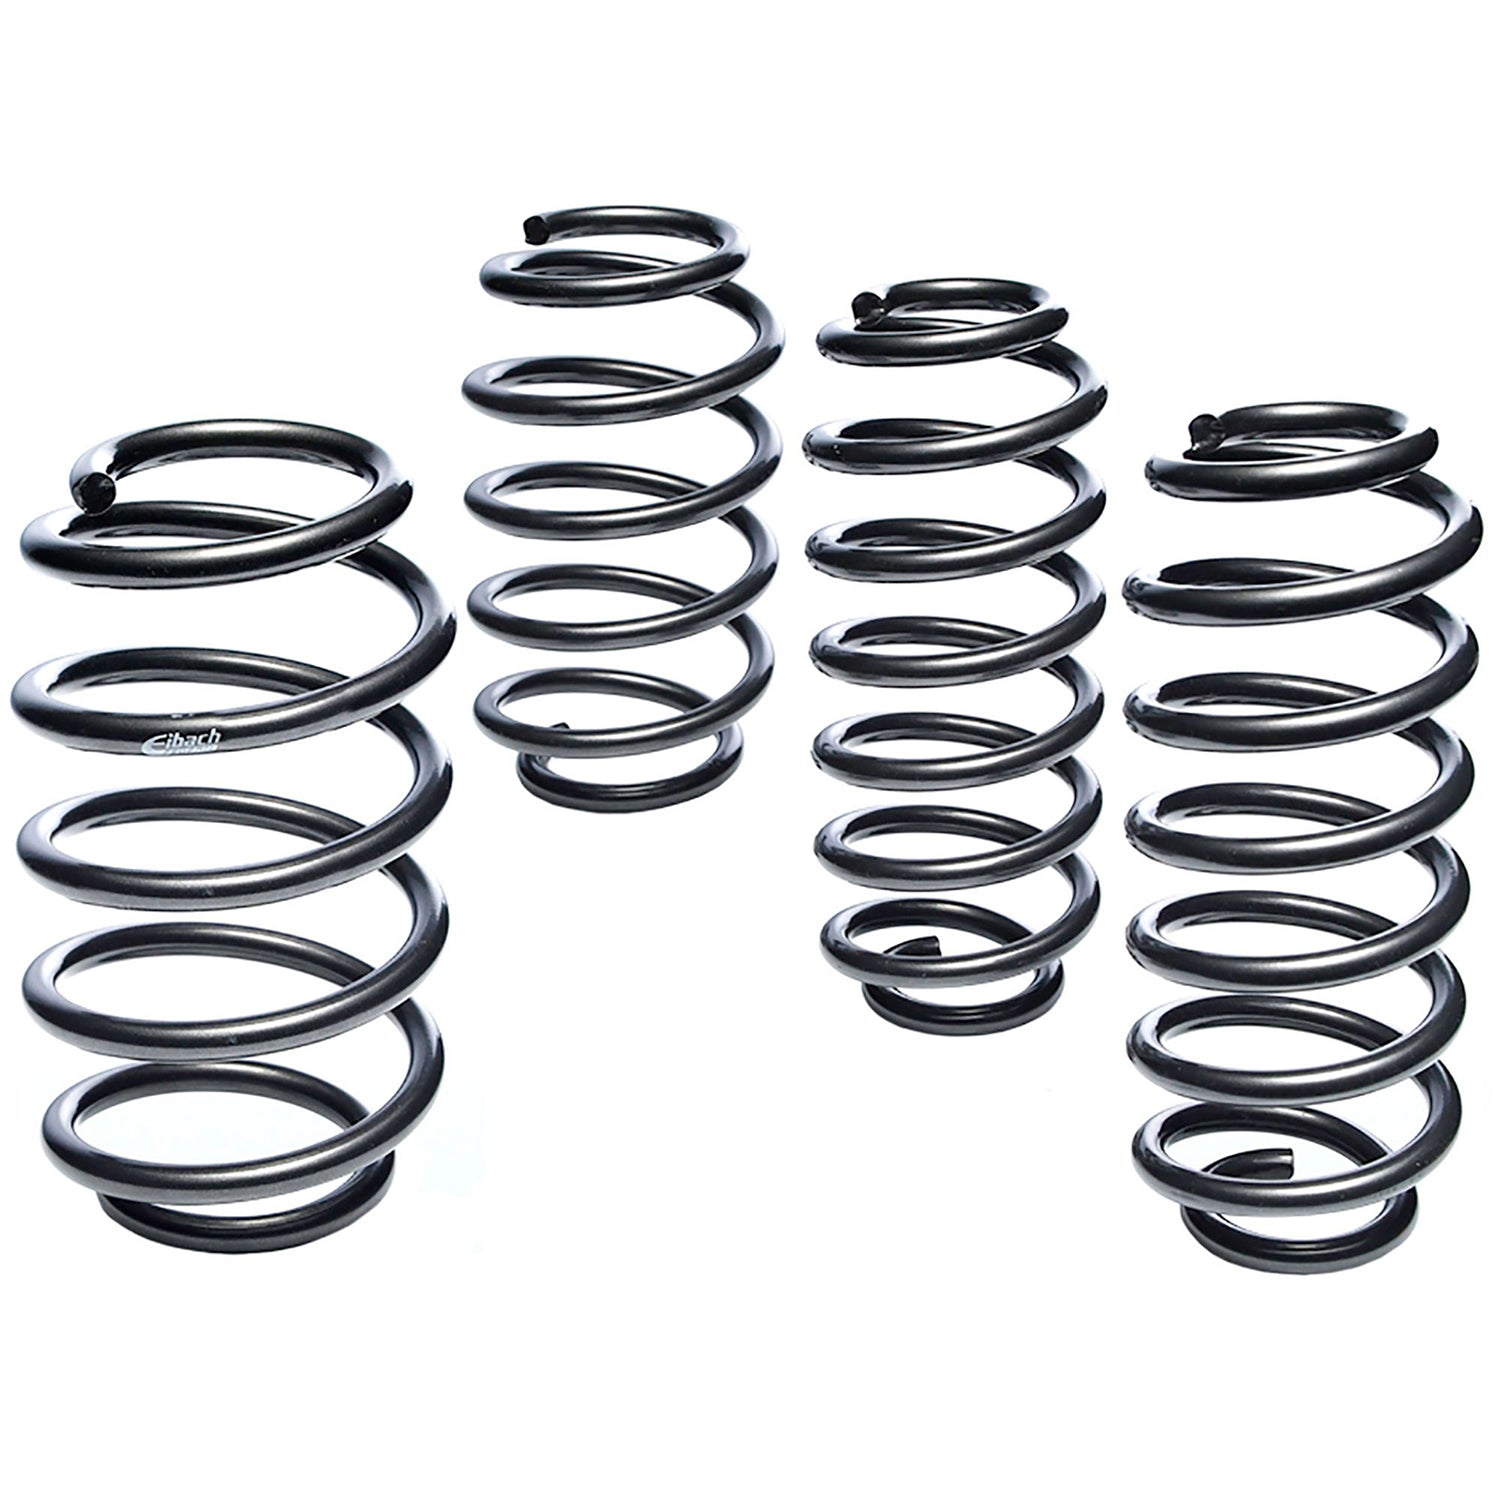 Eibach Pro Kit Lowering Springs For Audi RS3 8Y & 8V